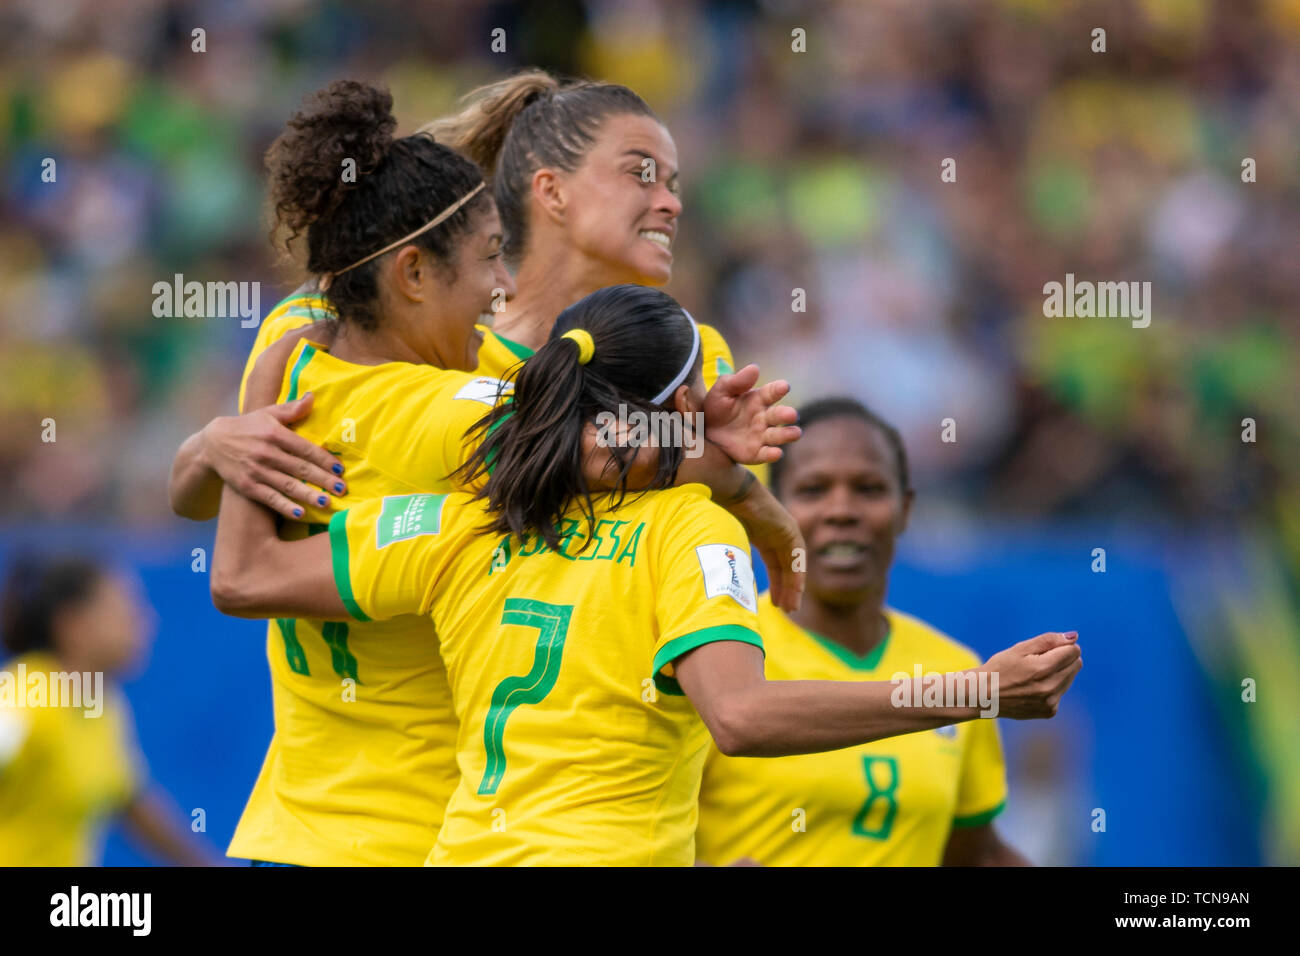 Grenoble, France. 09th June, 2019. BRAZIL VS. JAMAICA - Cristiane do Brasil celebrates after scoring a goal (3-0), her third, during a match between Brazil and Jamaica, valid for the 2019 FIFA Women&#39;s World Cup, held on Sunday, June 9, 2019, at the Stadium Stade des Alpes in Grenoble, France. Credit: Foto Arena LTDA/Alamy Live News Stock Photo